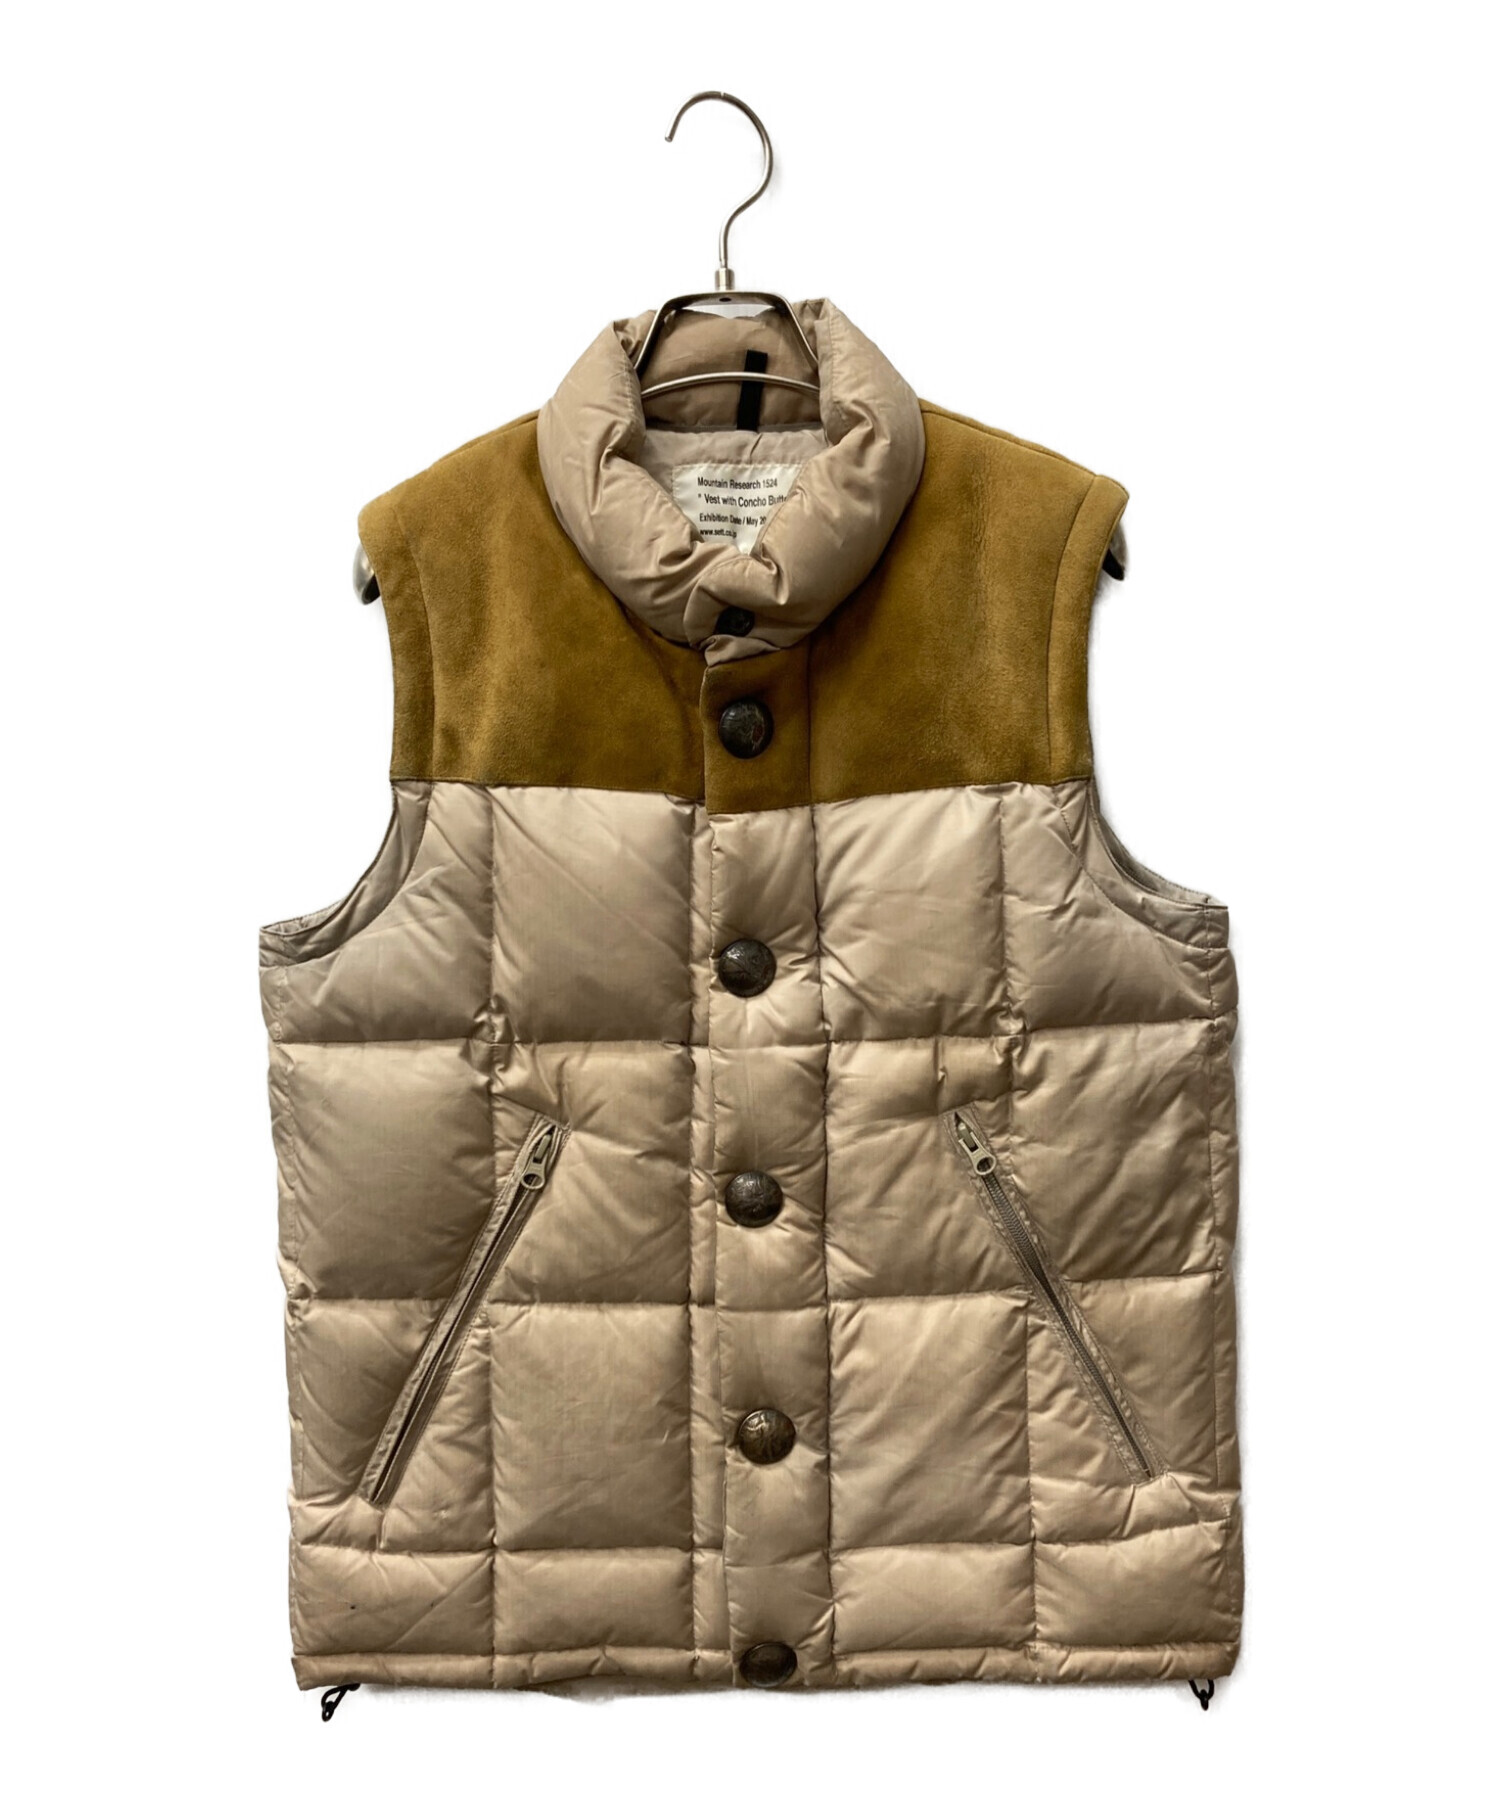 MOUNTAIN RESEARCH (マウンテンリサーチ) VEST WITH CONCHO BUTTONS ベージュ サイズ:M